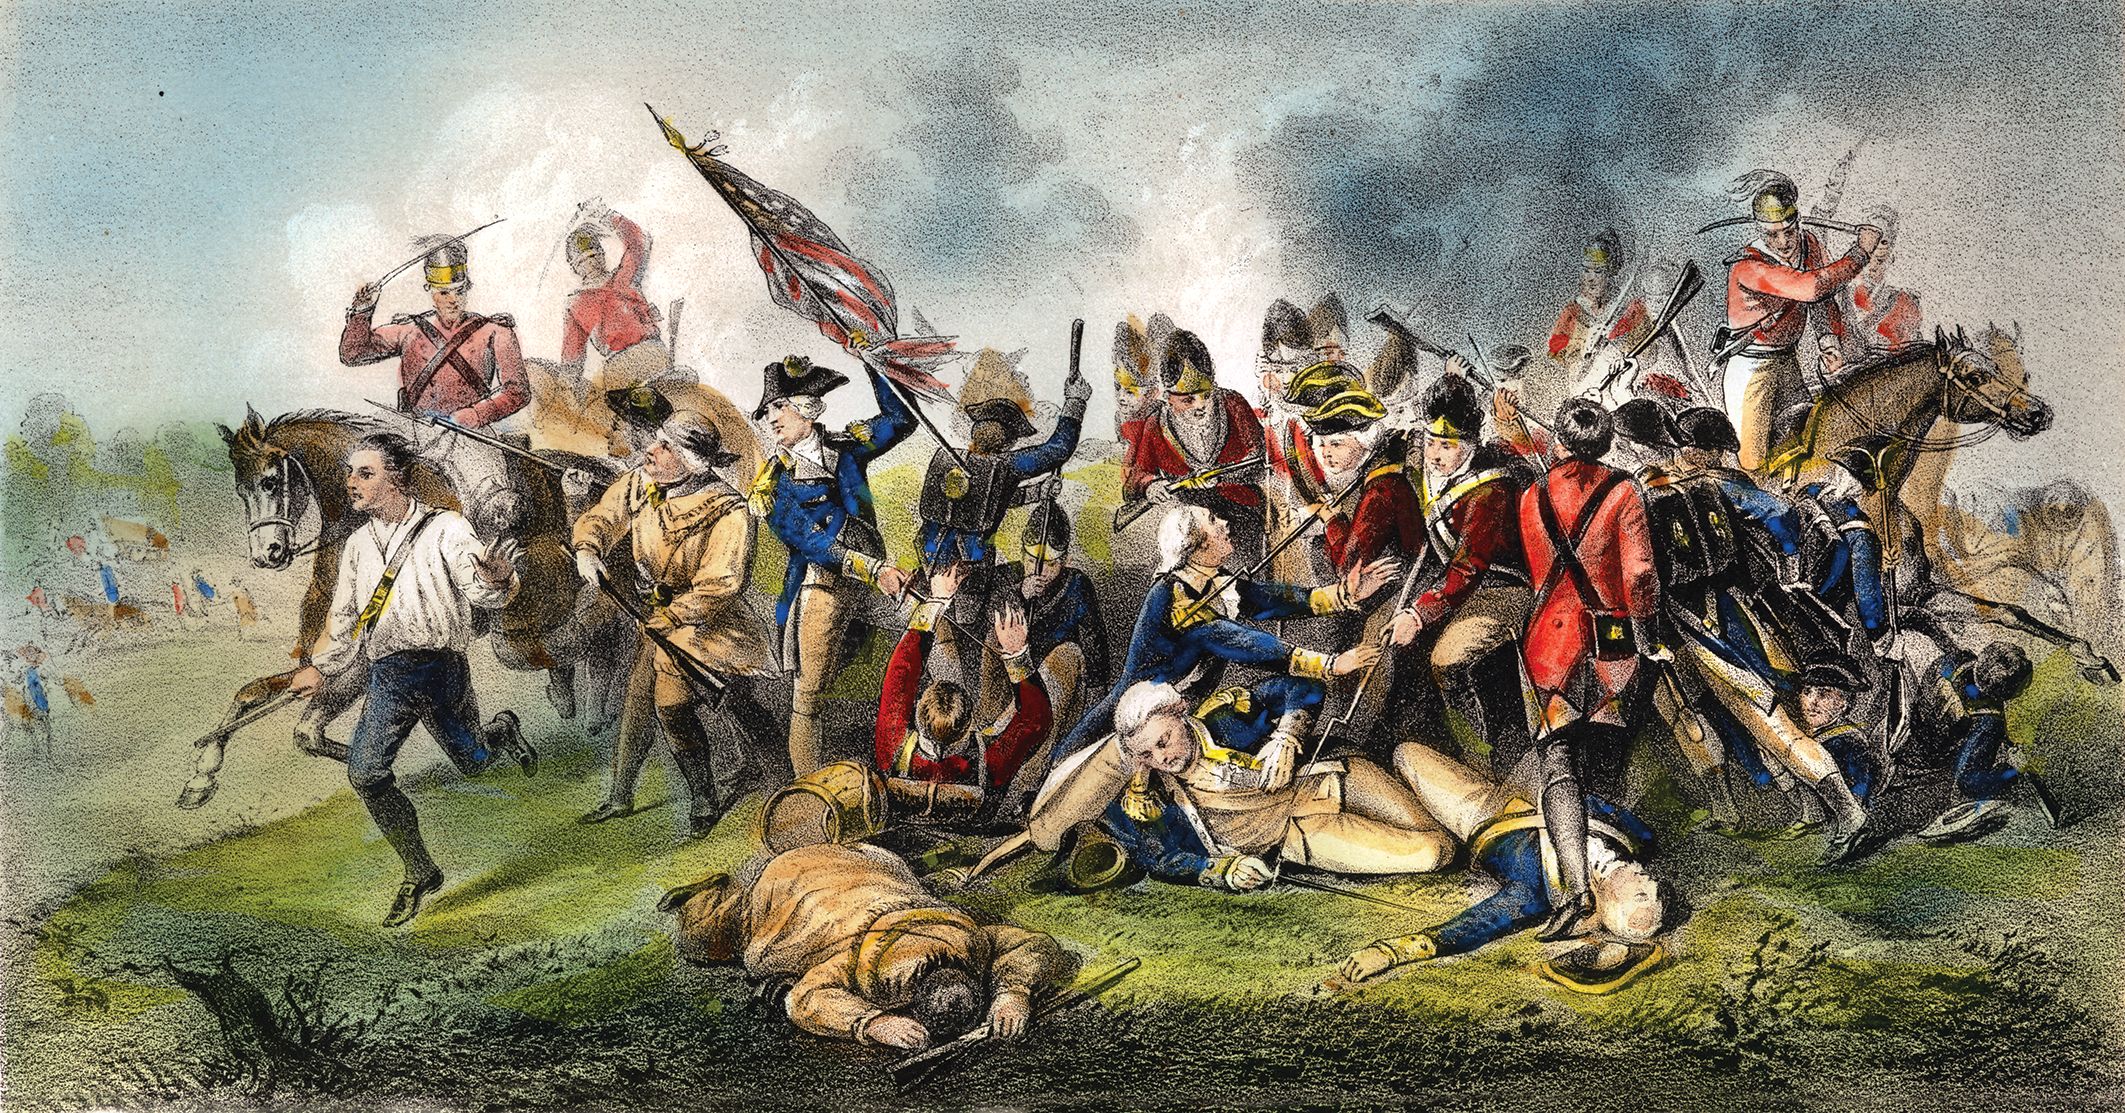 Another American disaster occurred at Camden, South Carolina when Cornwallis, although outnumbered, routed the American army commanded by General Horation Gates. 